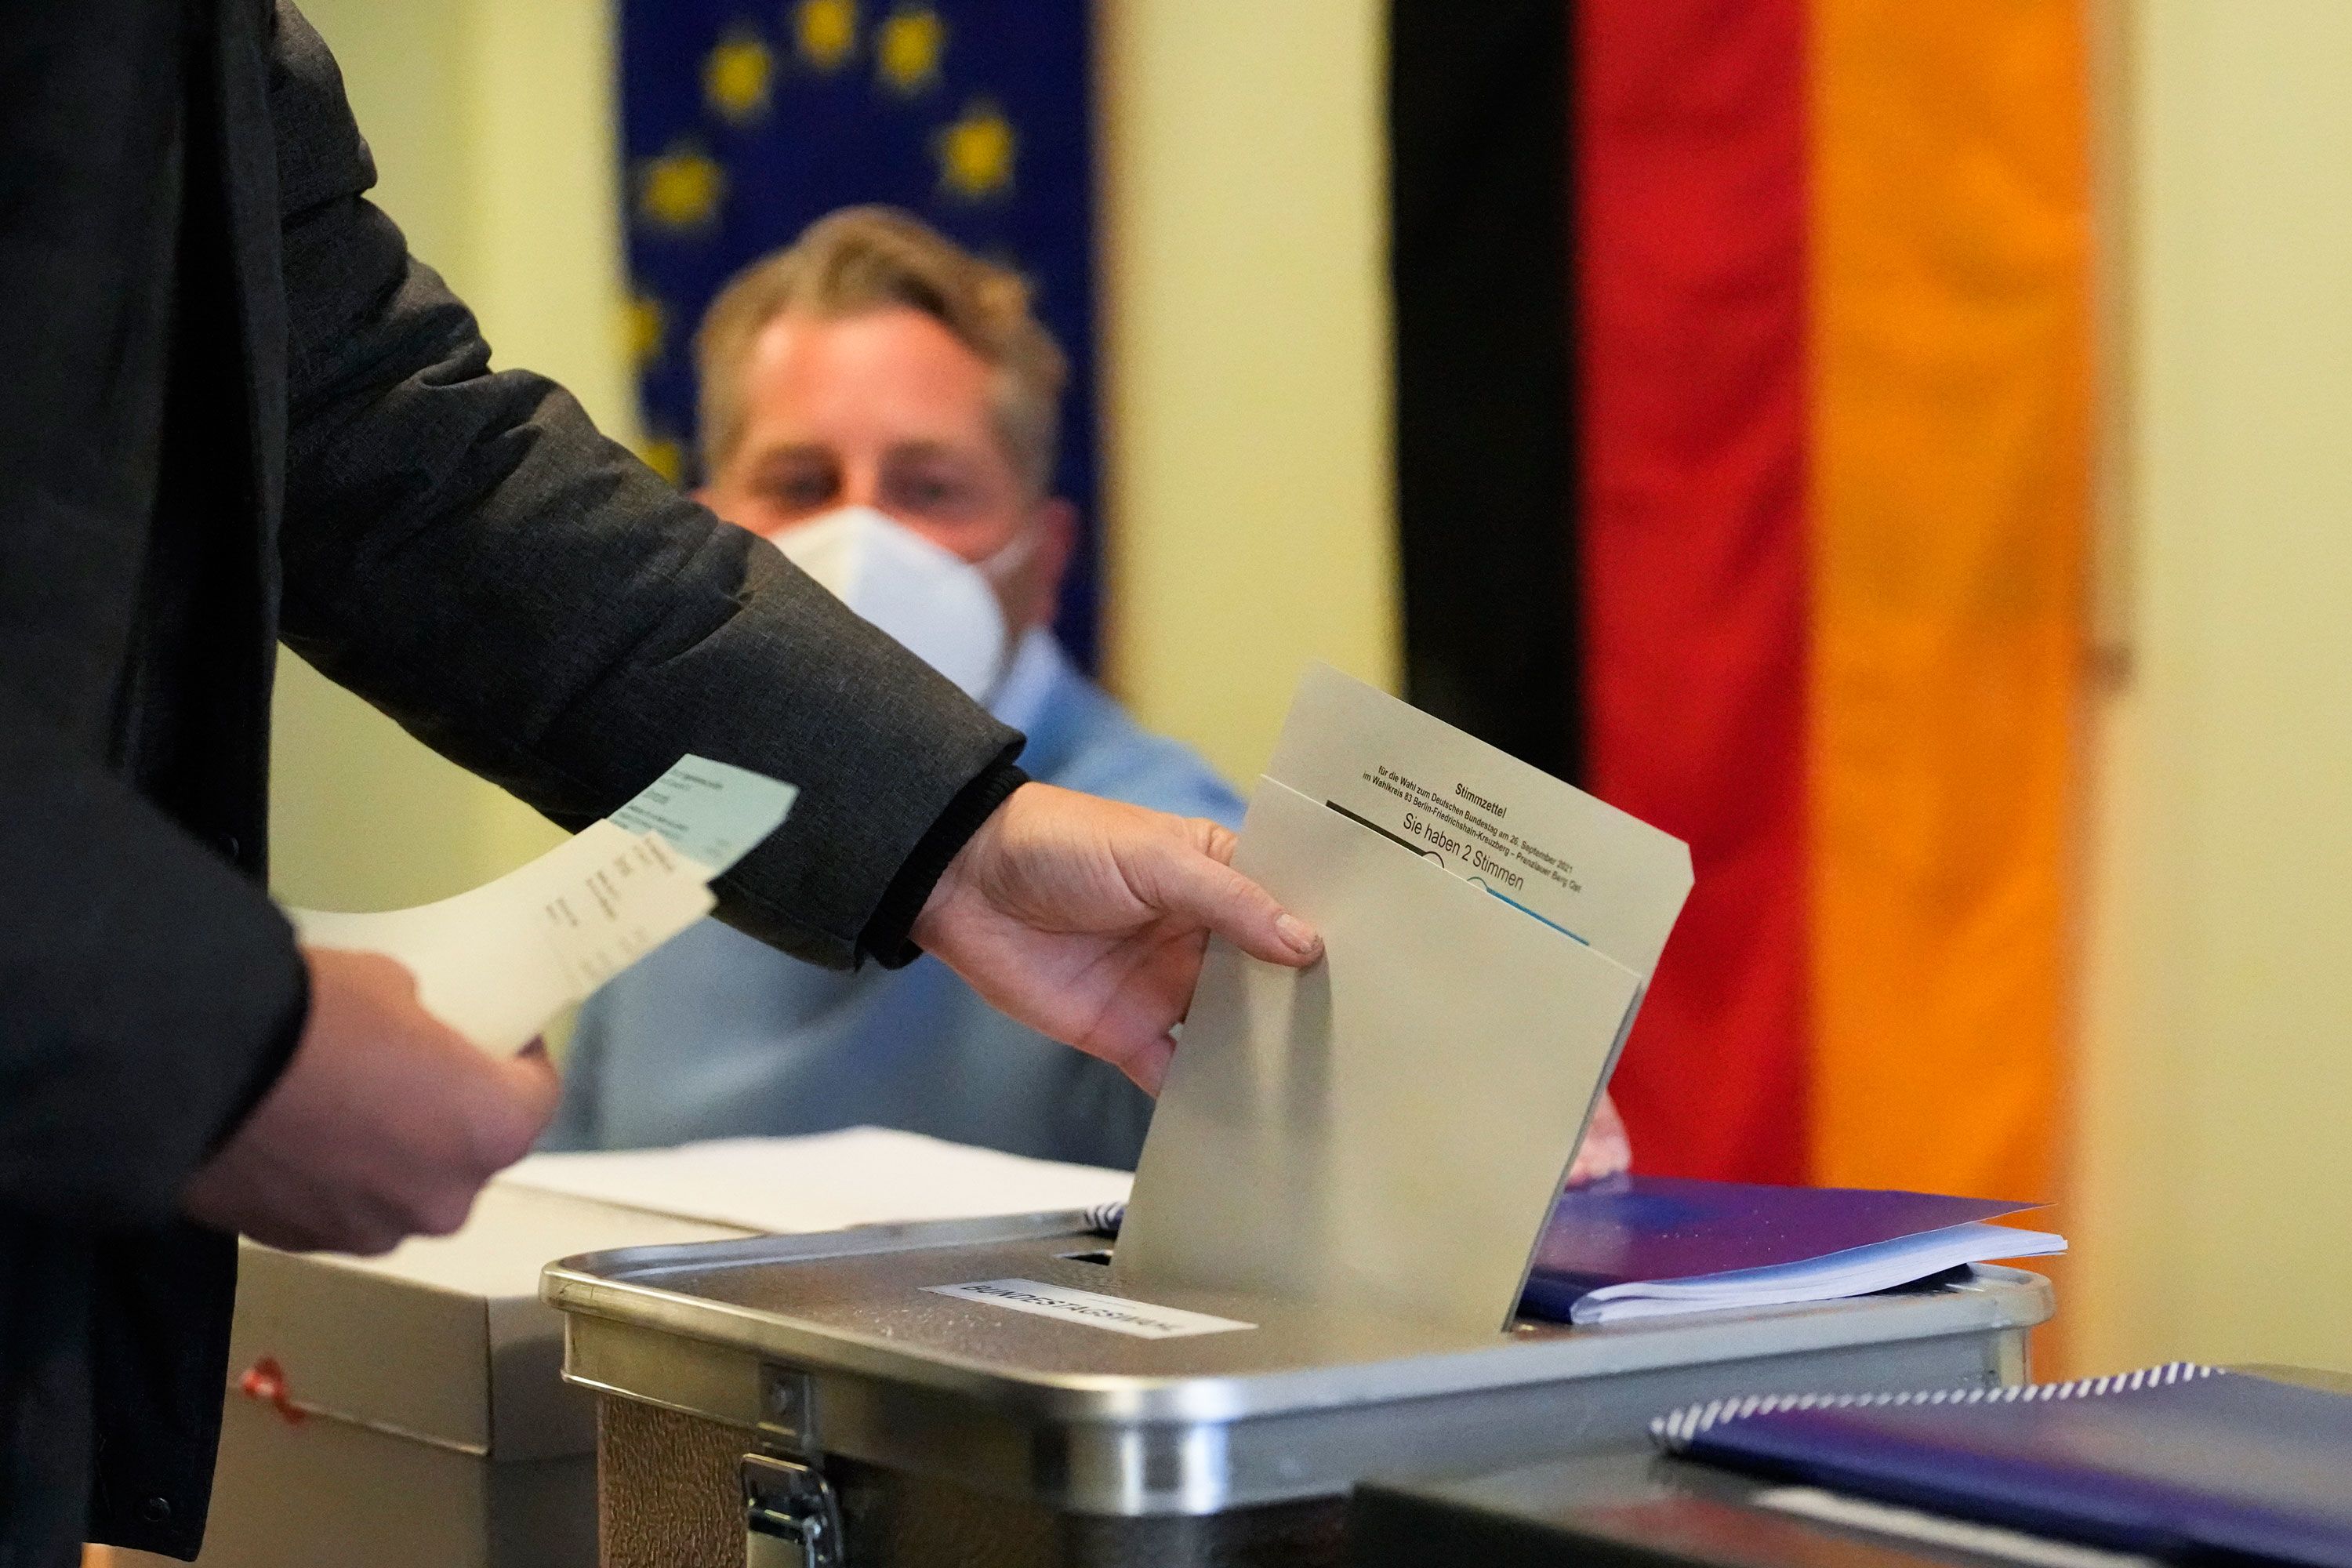 SPD wins most seats in Germany's landmark election, preliminary official  results show